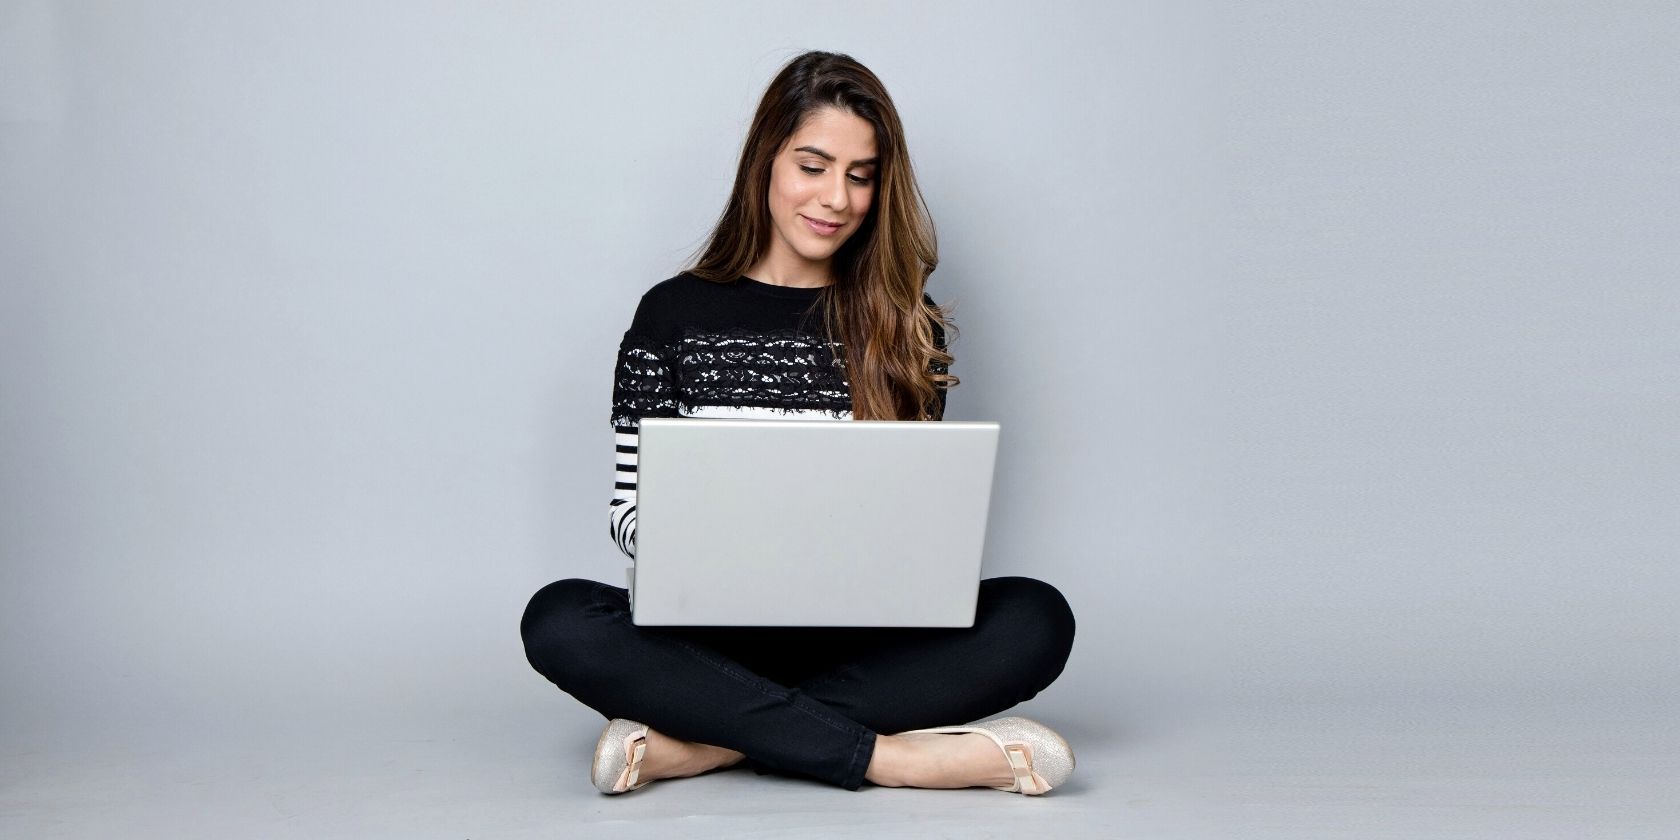 A girl typing on a laptop while leaning against a wall